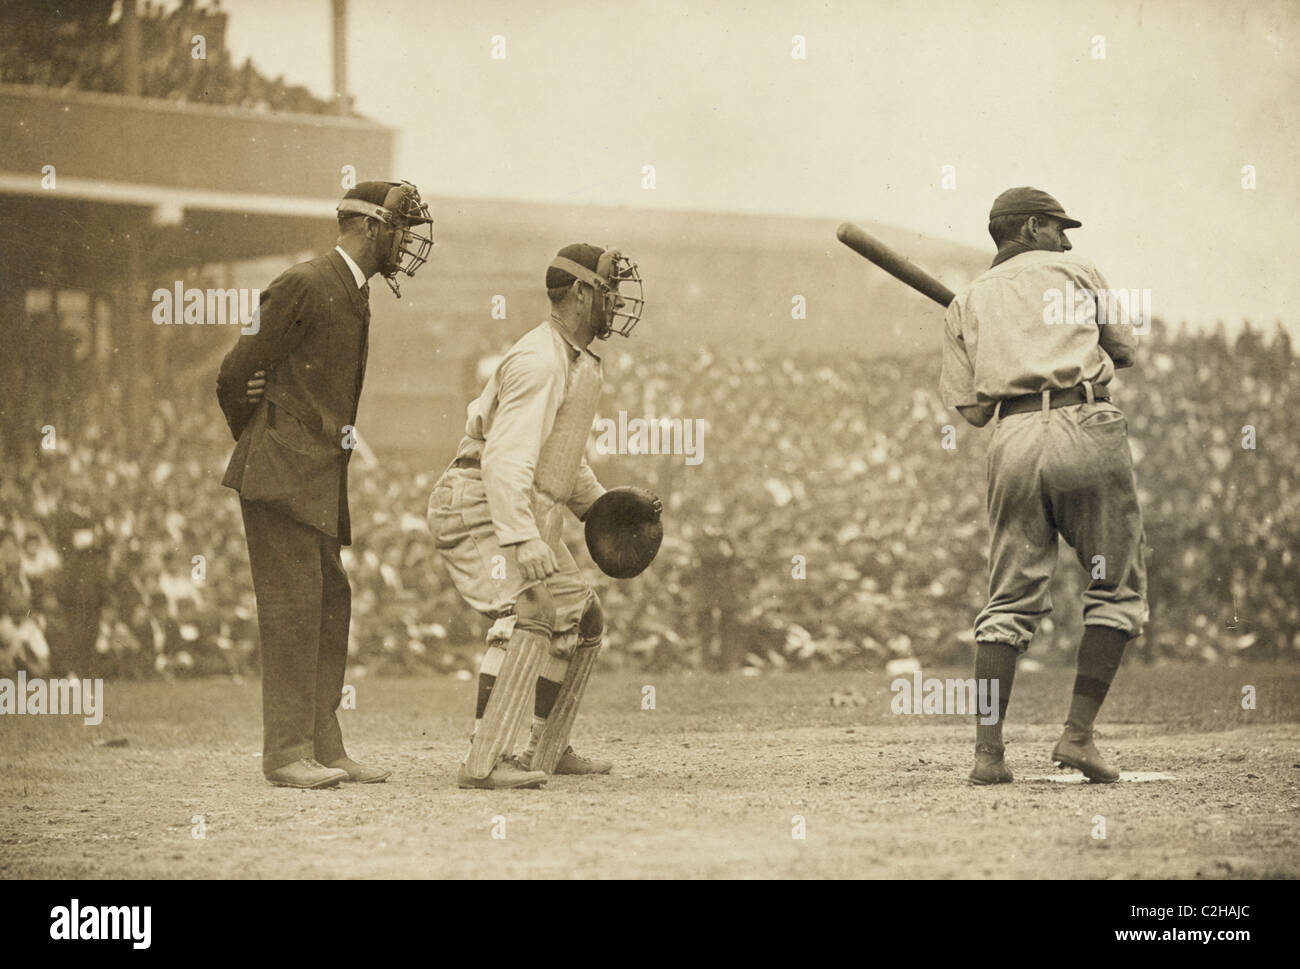 Roger Bresnahan, catching for the New York Giants -Pirates at bat Stock Photo